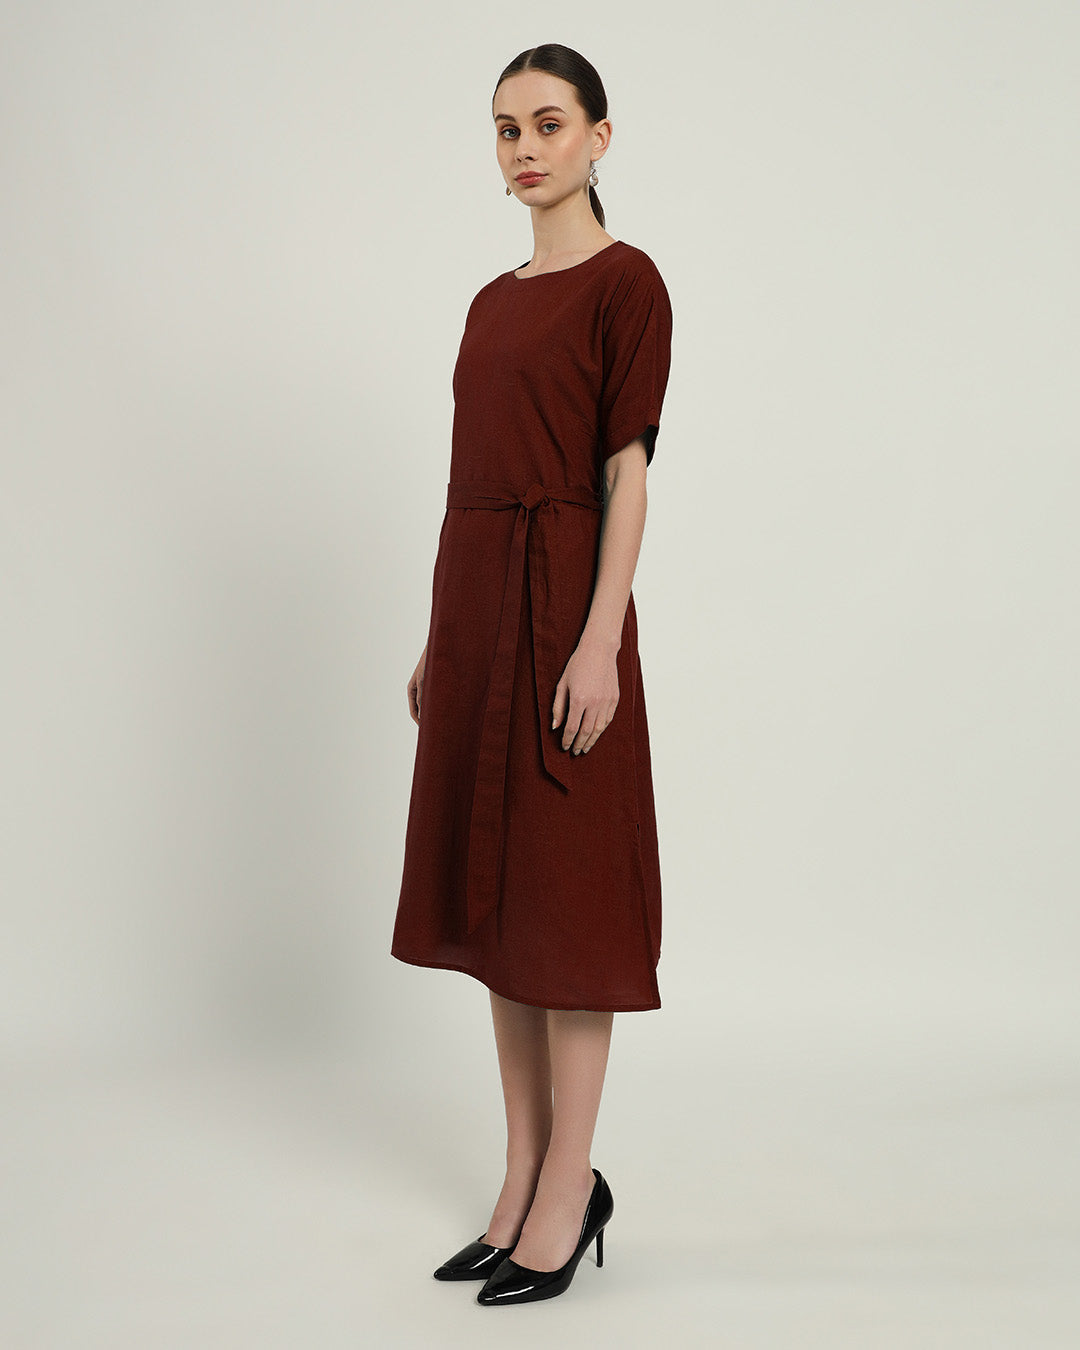 The Tayma Rouge Cotton Dress